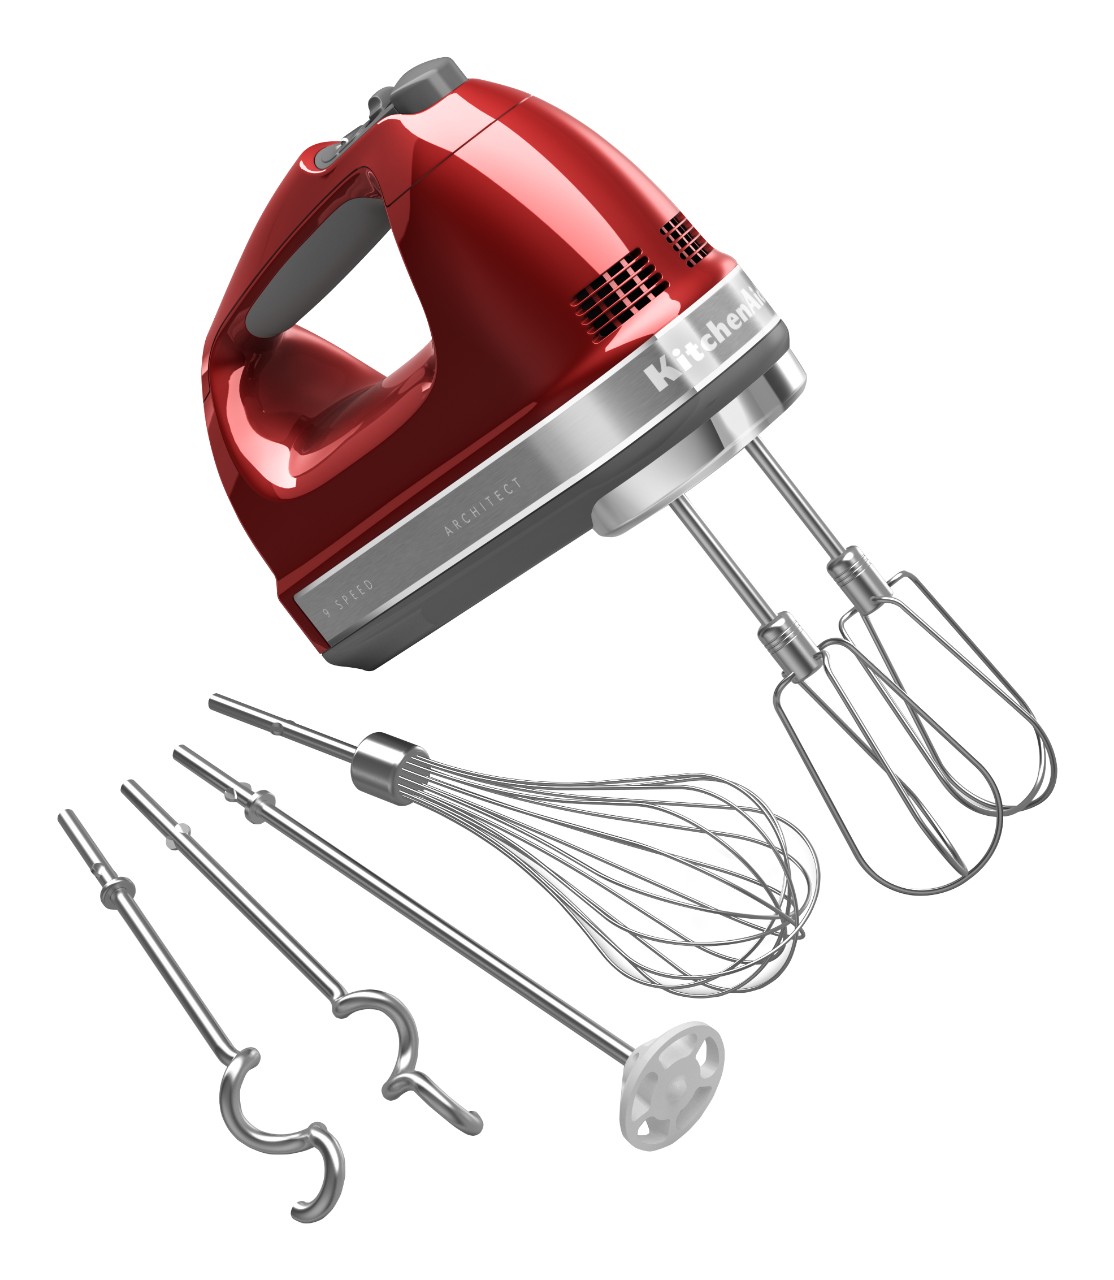 Available nine-speed and digital display hand mixers from KitchenAid.